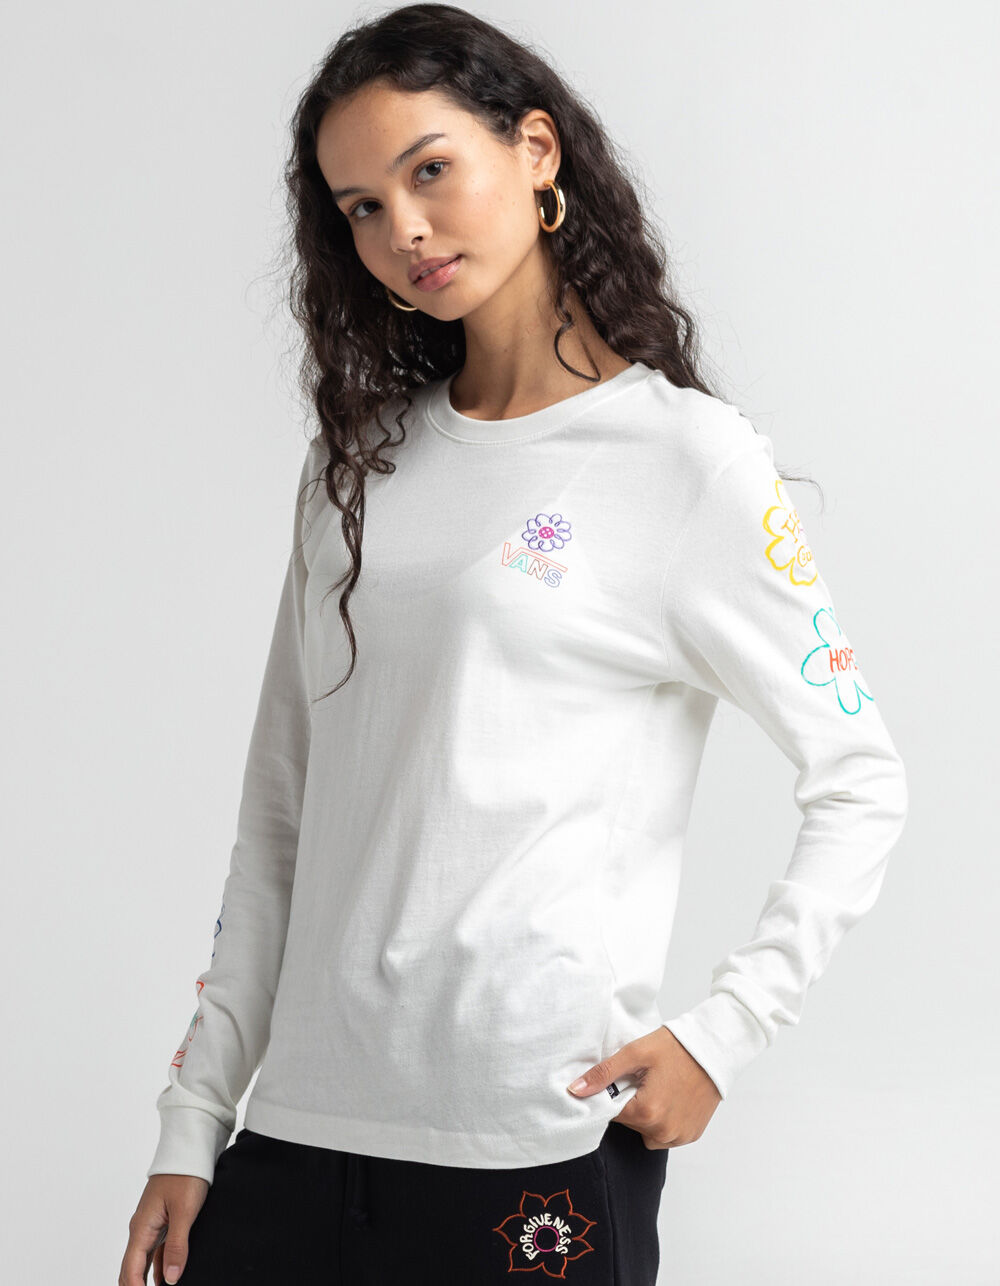 VANS Cultivate Care Womens Tee - OFWHT | Tillys